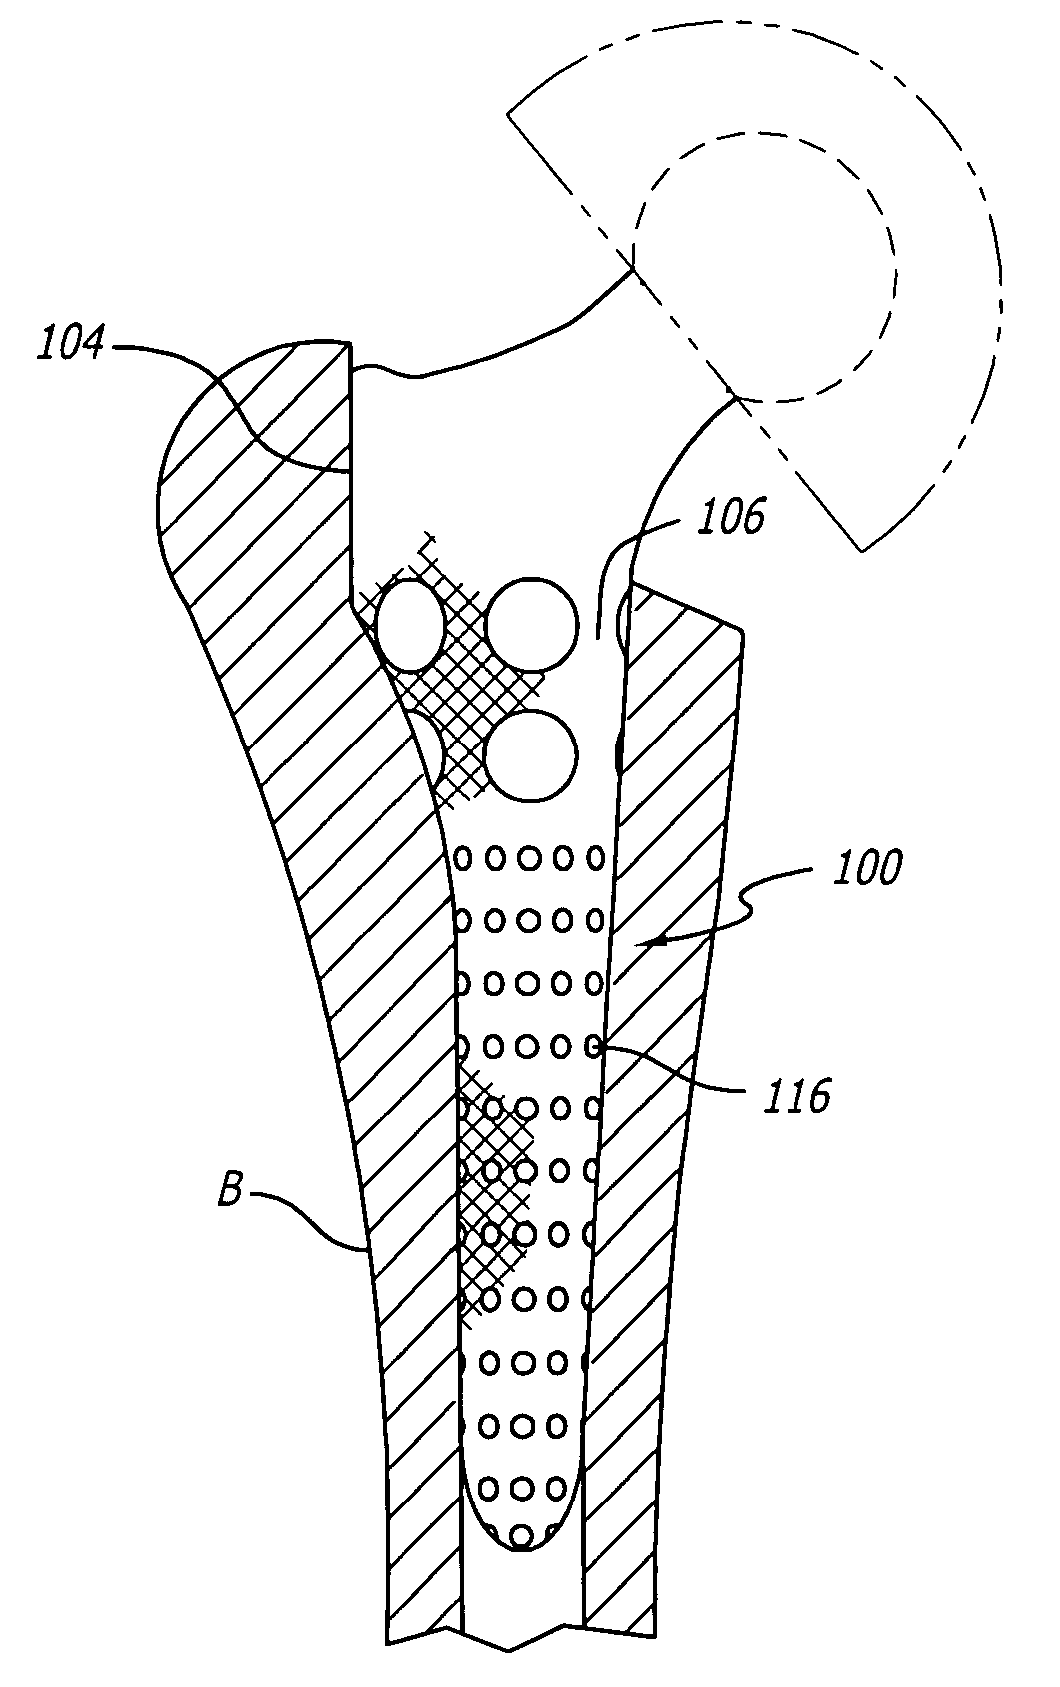 Orthopedic implant surface configuration with a projection having a back cut